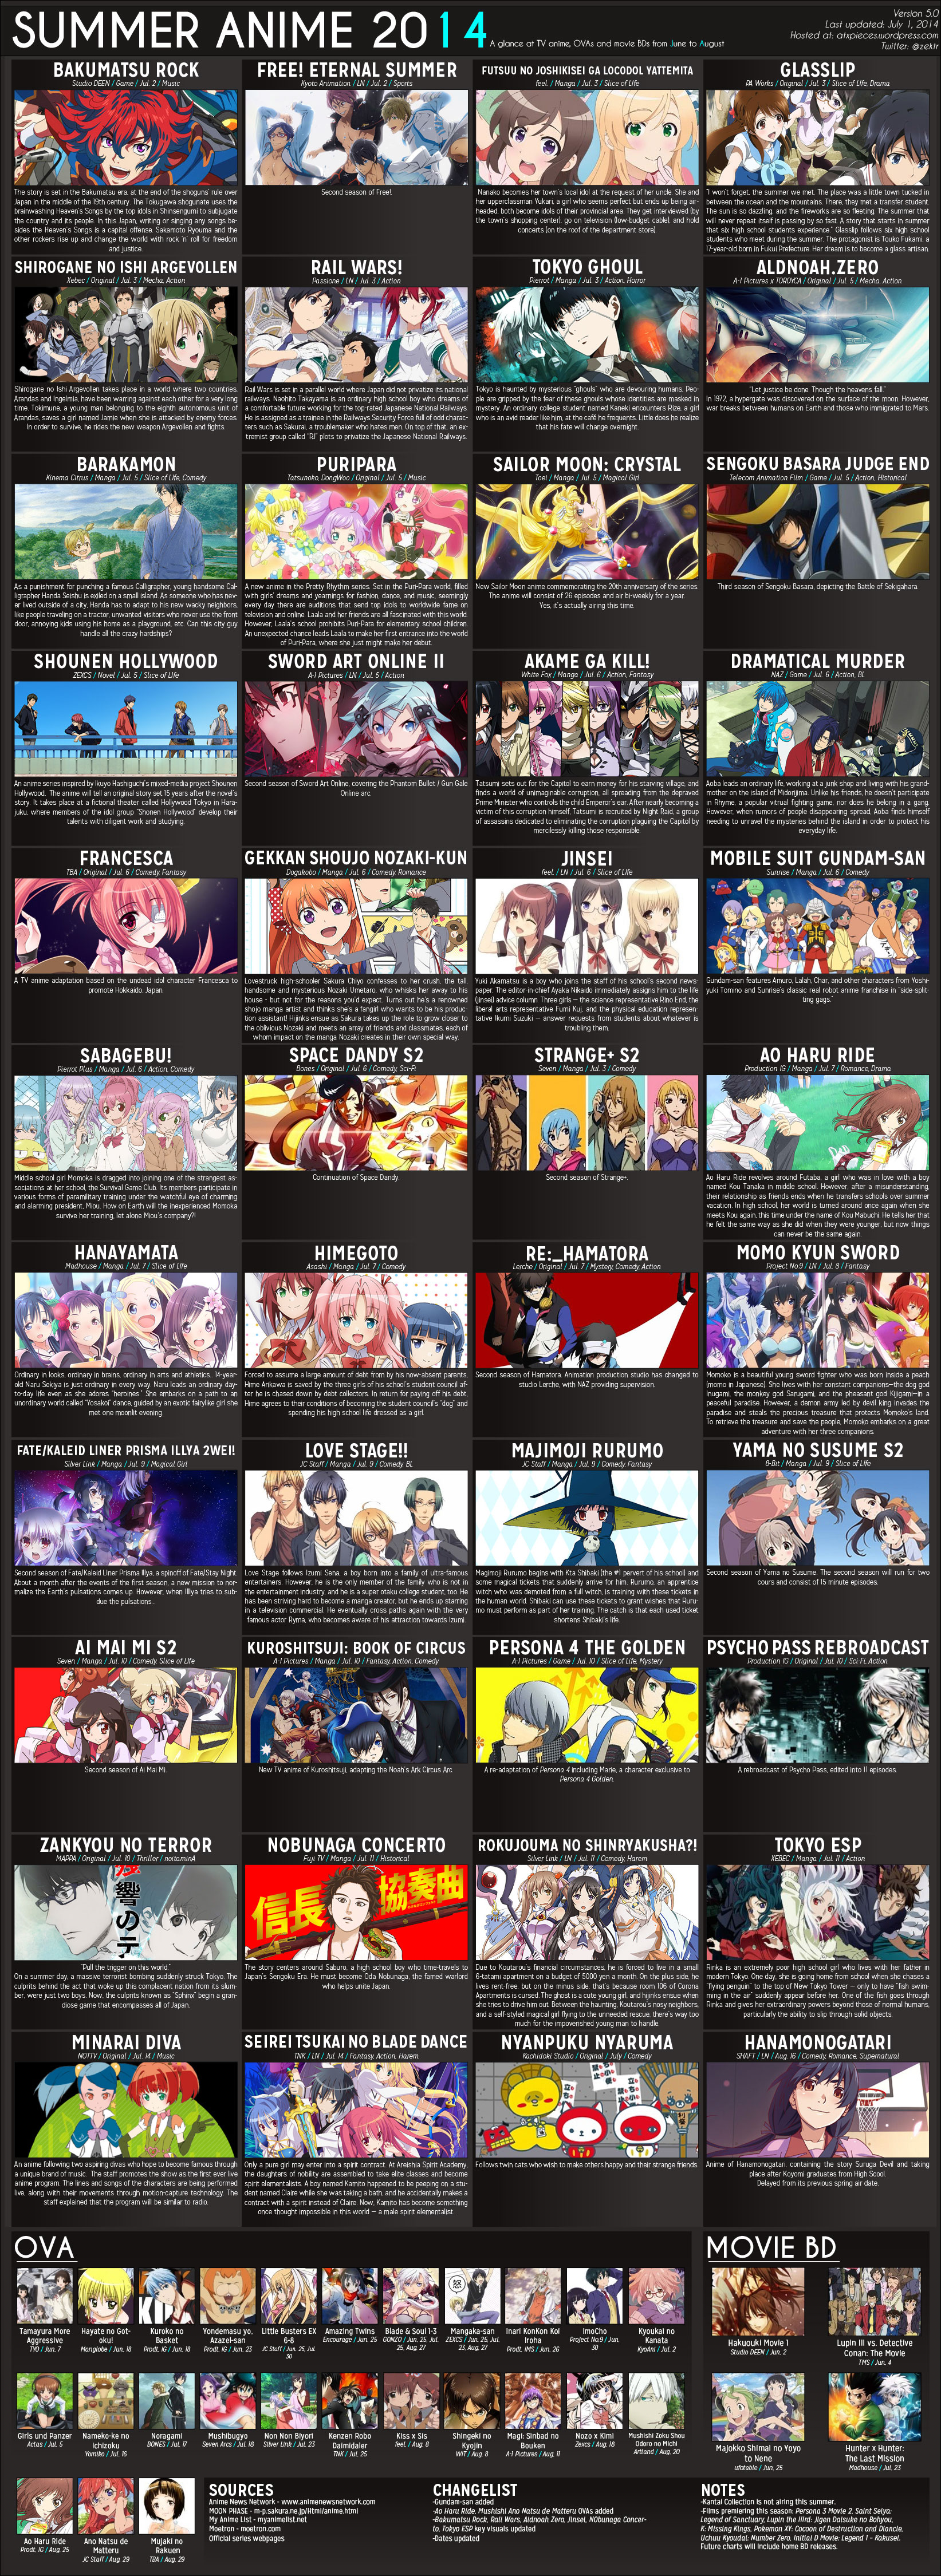 Summer Anime Chart 2014 [Atxpieces v5]